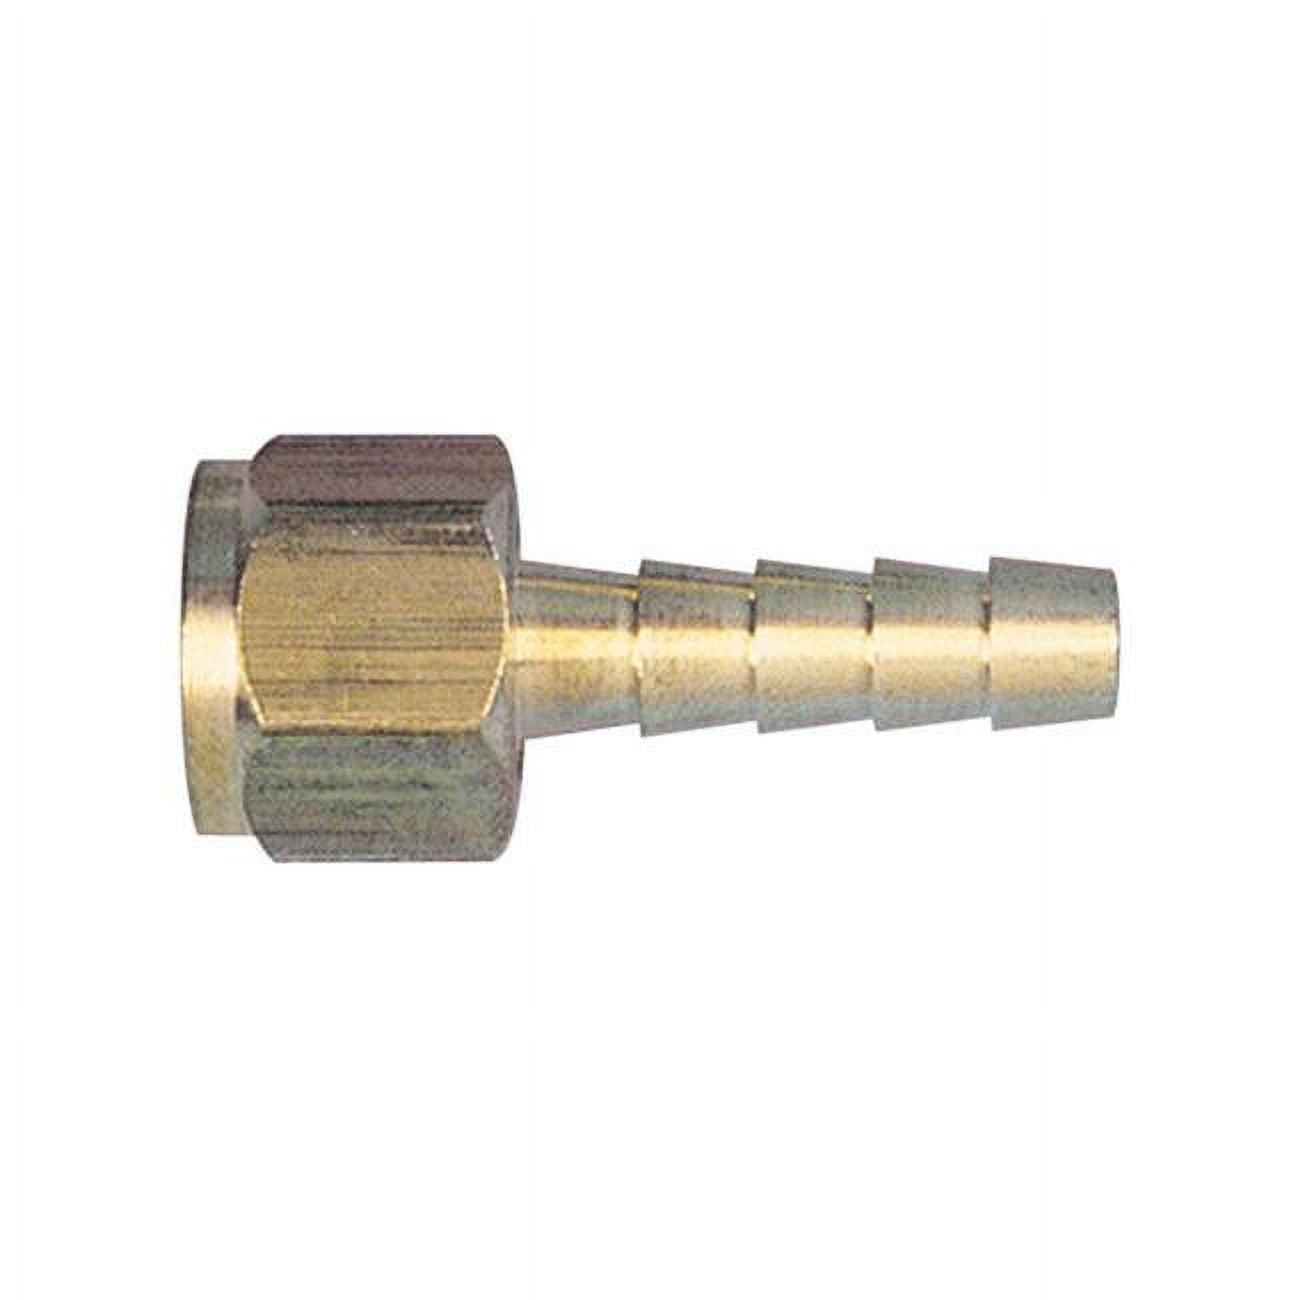 21323 0.25 In. Female Swivel Hose End Barb Type Hose Fitting